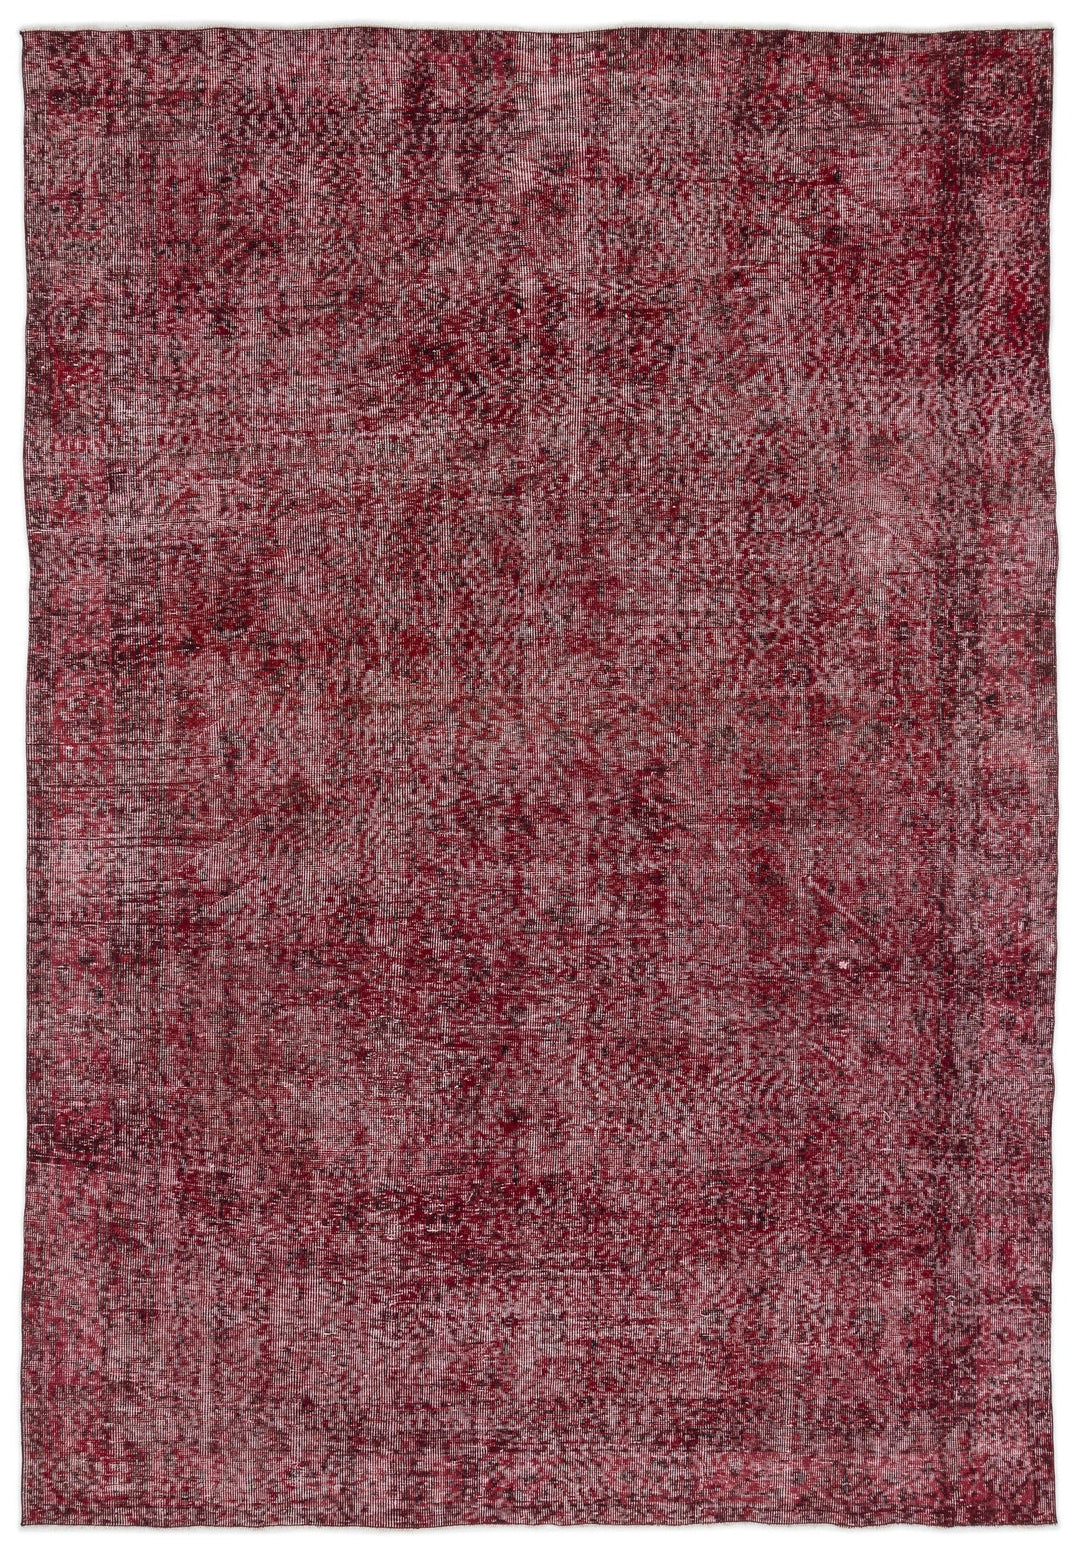 Athens Red Tumbled Wool Hand Woven Carpet 214 x 310